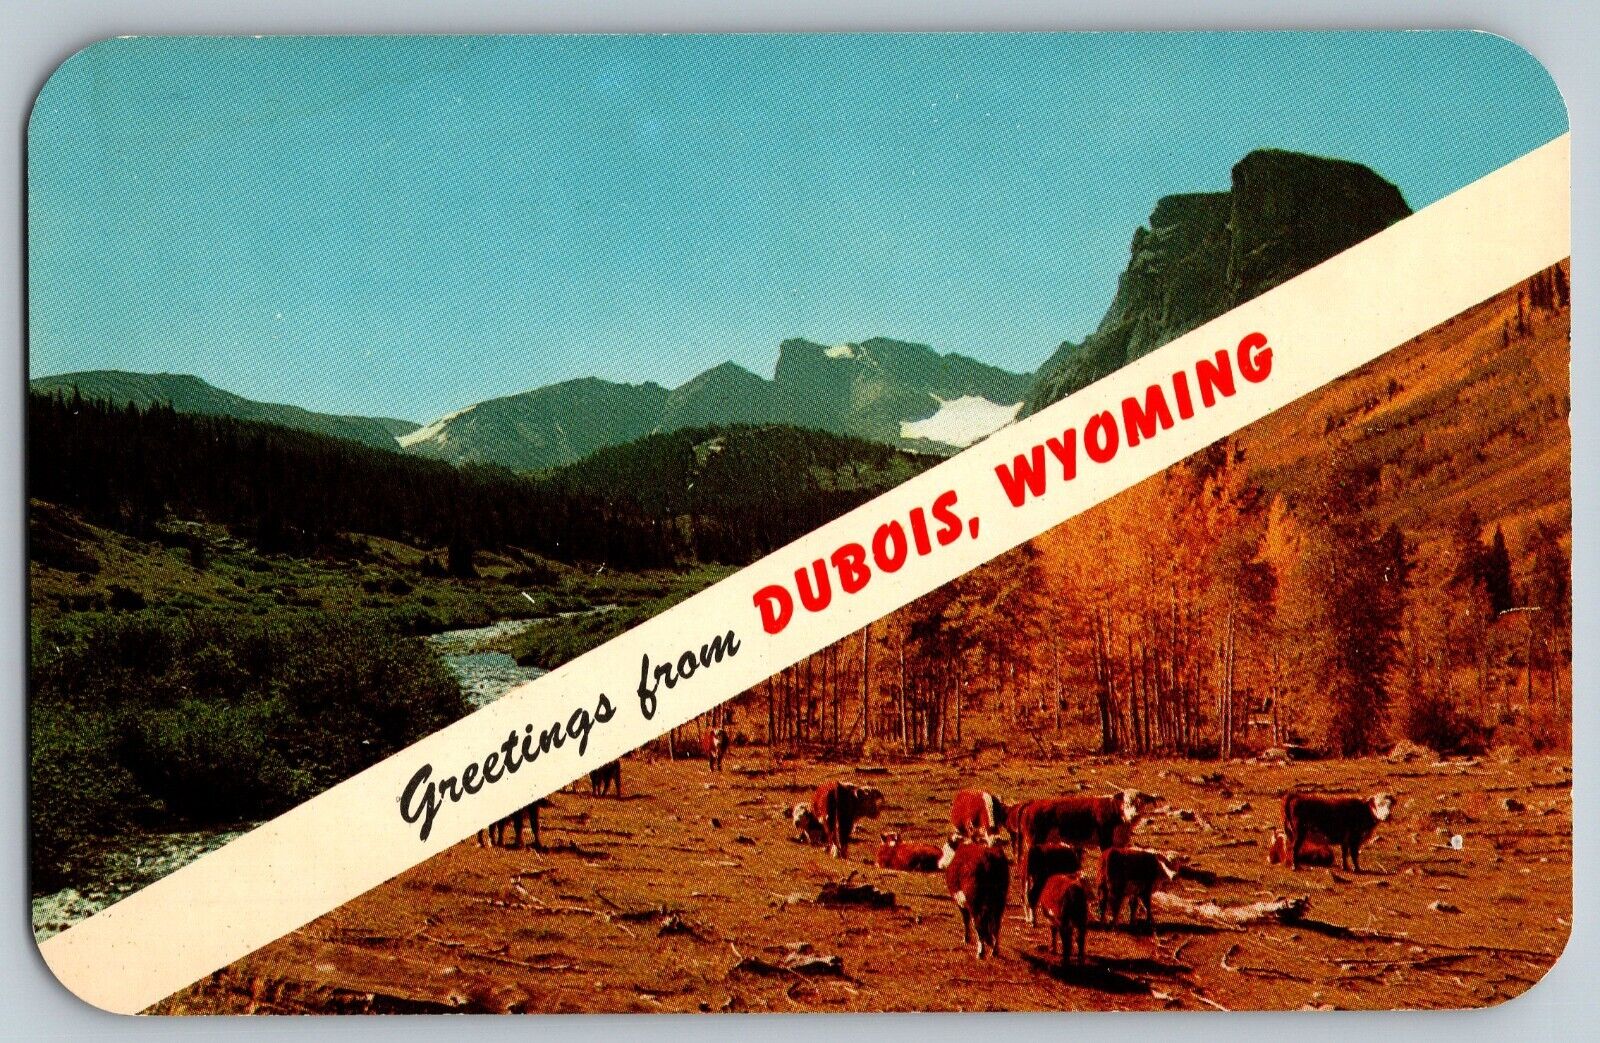 Dubois, Wyoming - Greetings - Old Western Cowtown - Vintage Postcard - Unposted